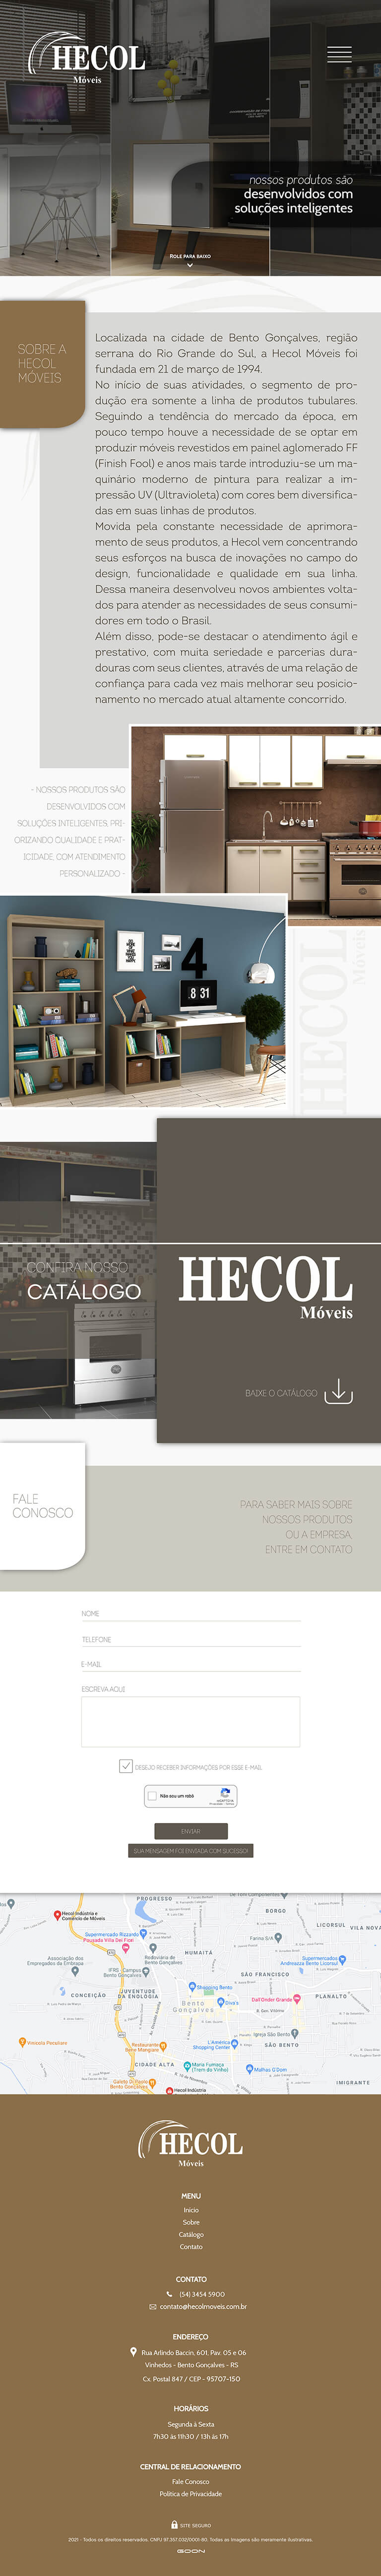 Hecol layout mobile version